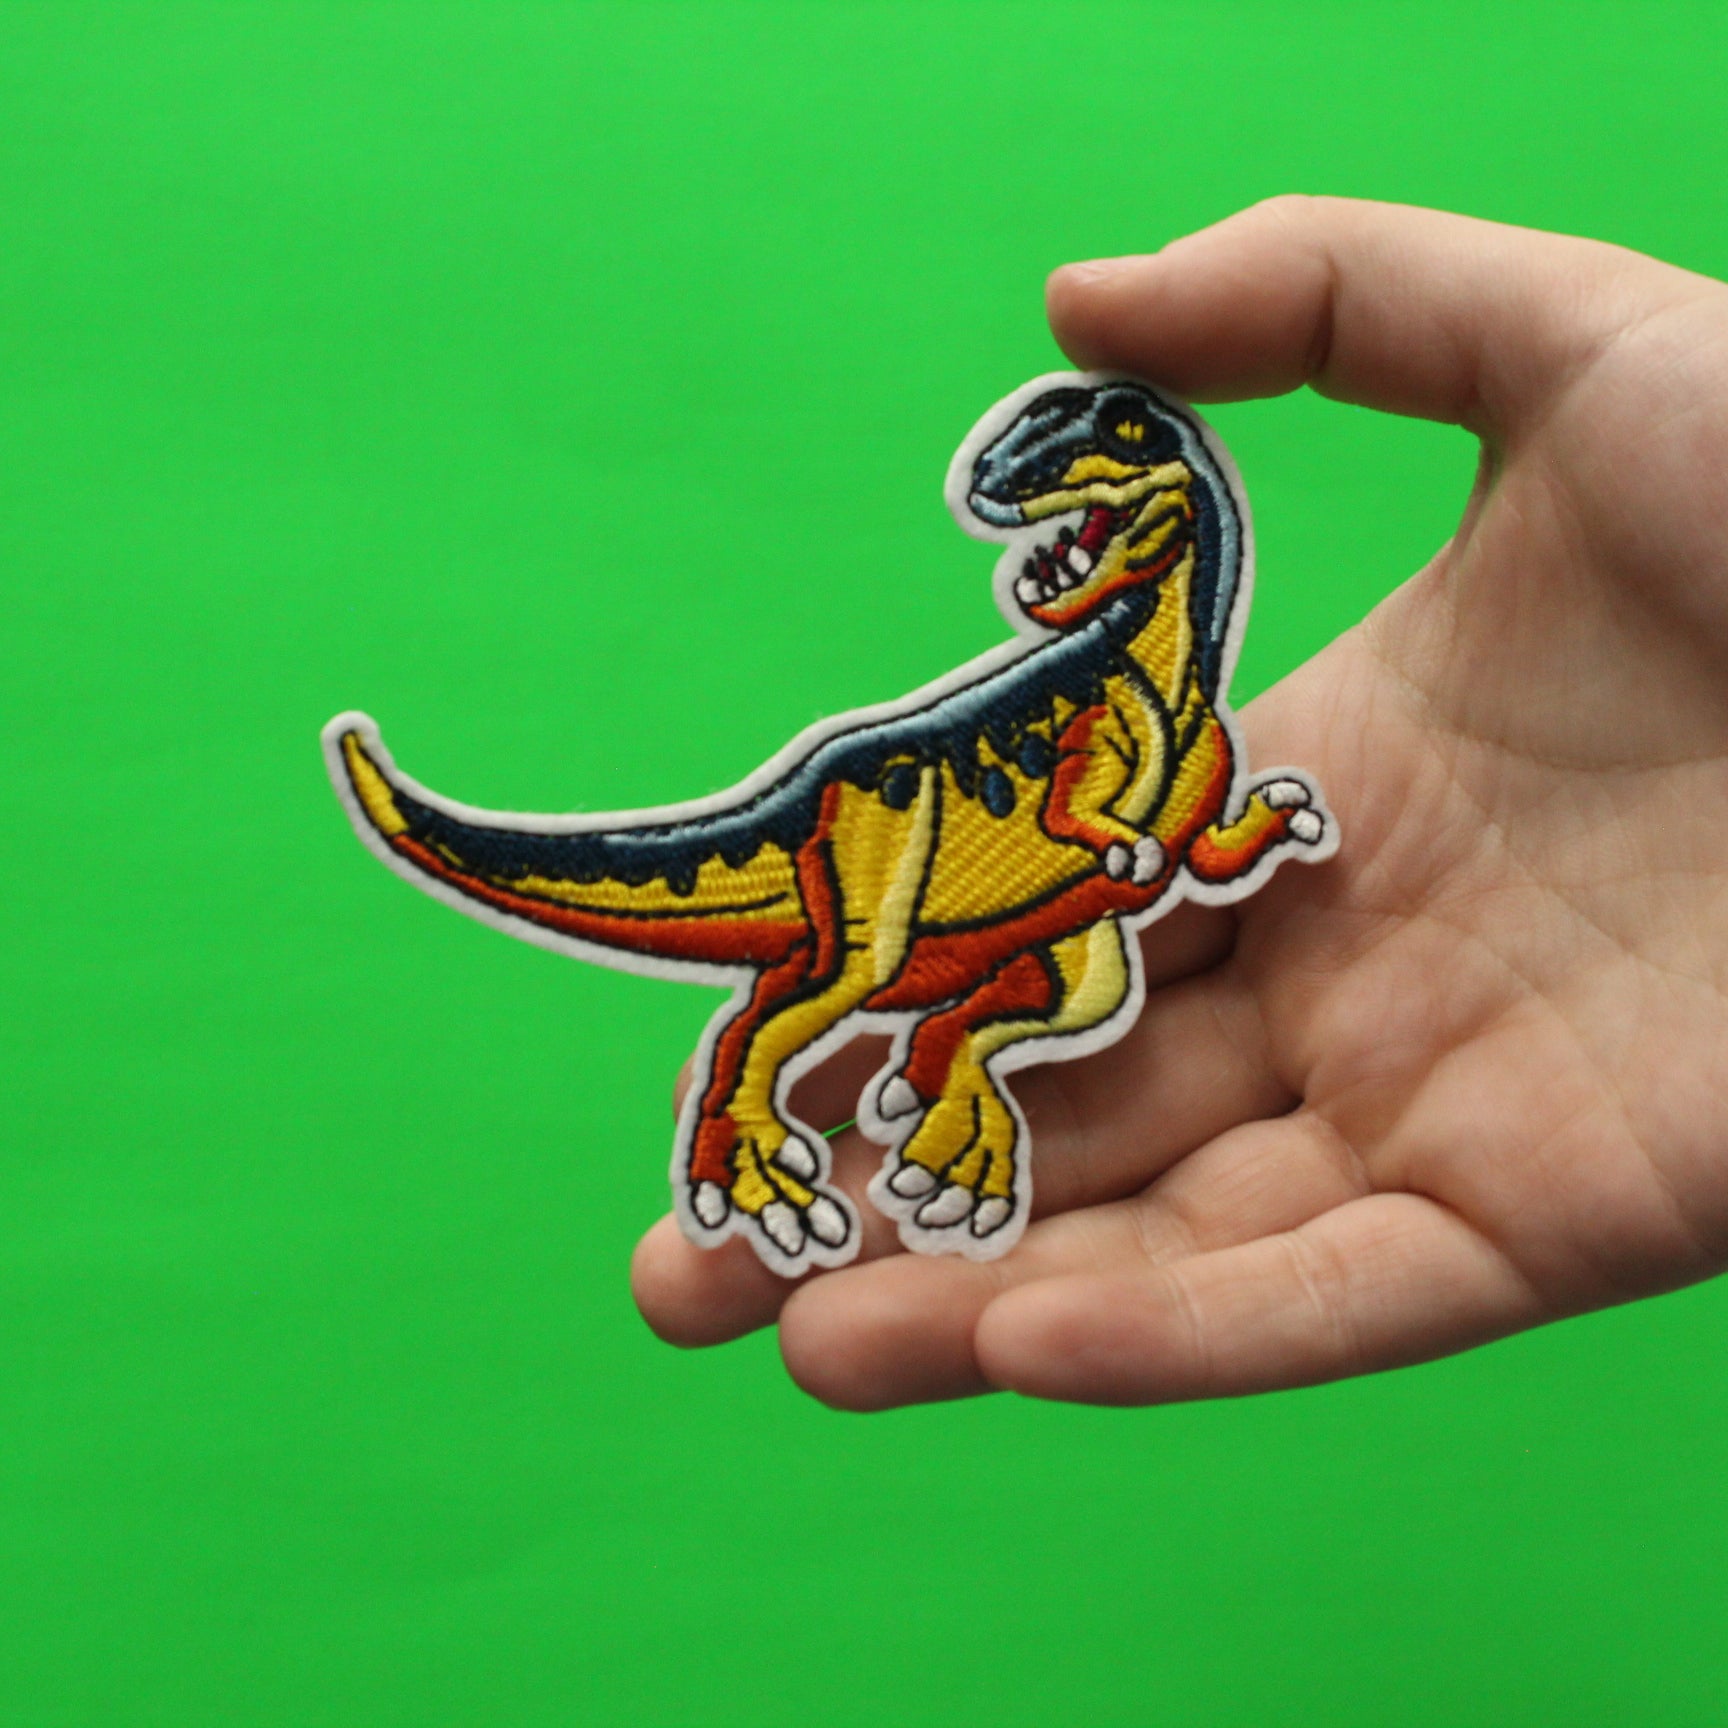 Velociraptor Standing Yellow And Blue Dinosaur Embroidered Iron On Patch 